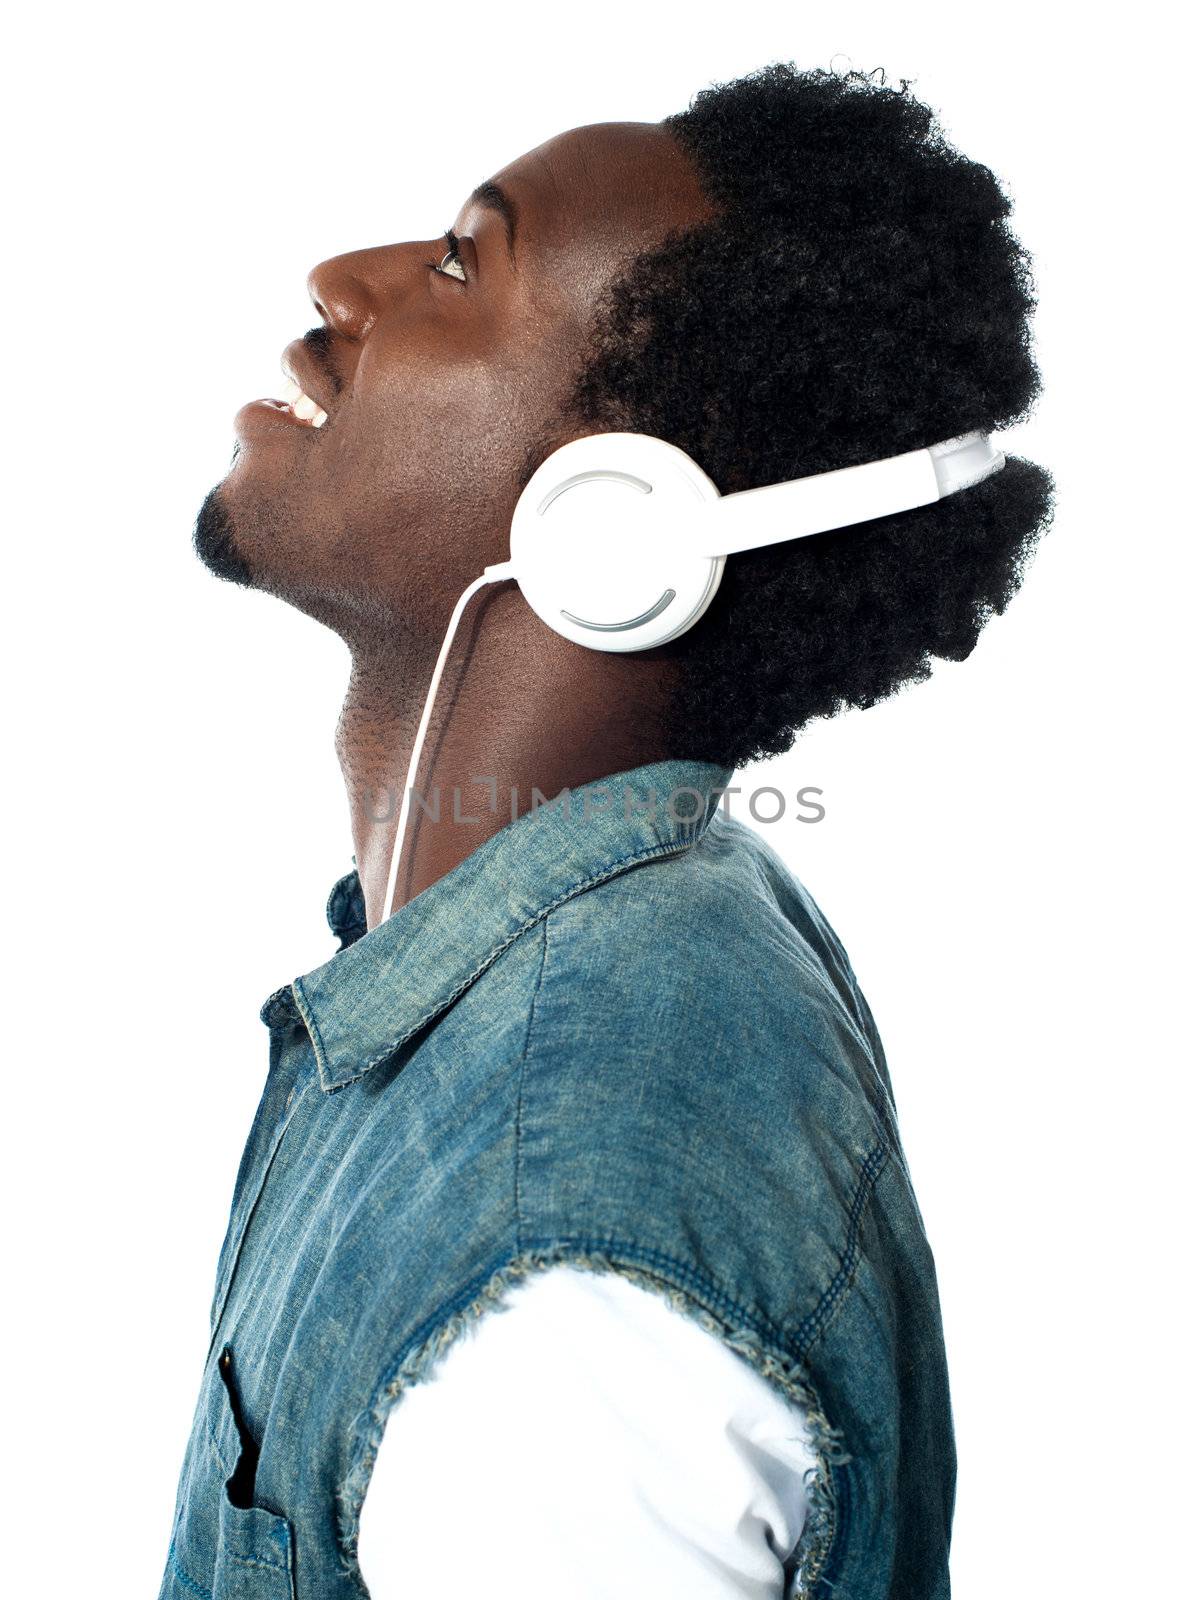 A handsome young boy with headphones by stockyimages